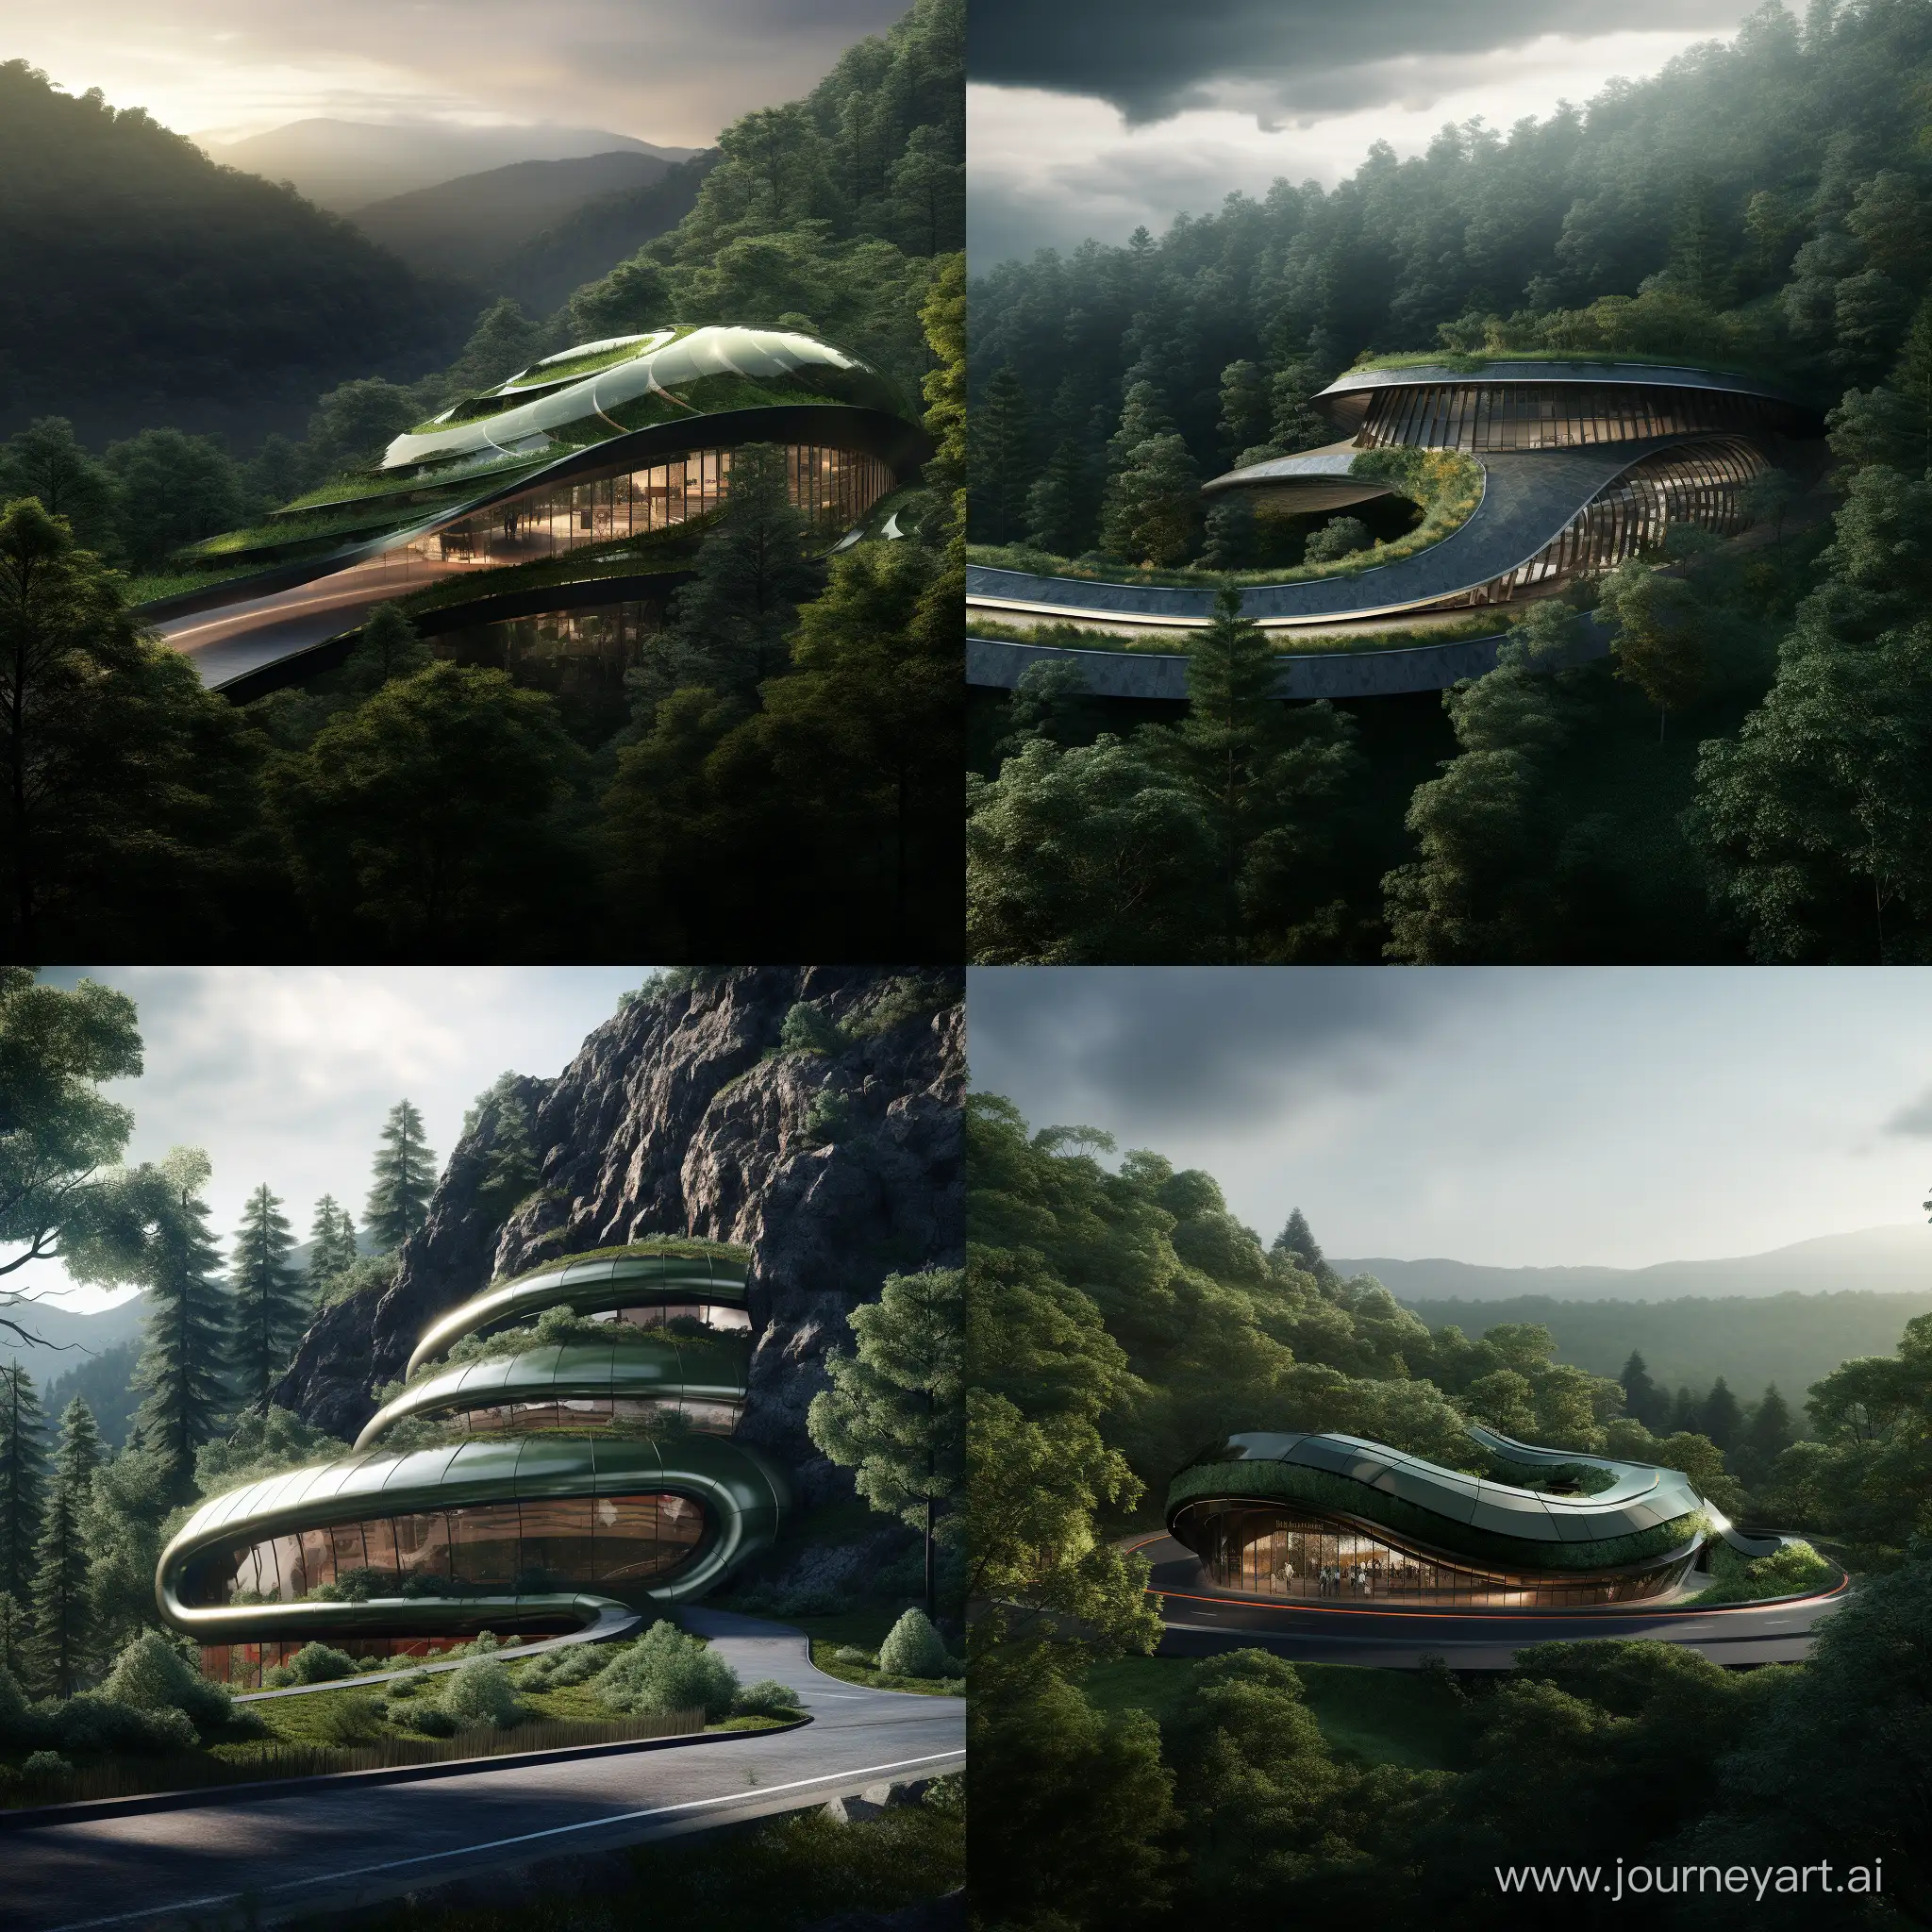  render of a curved, green, windowless building with metal covering  in mountain full of tress and a road in the front